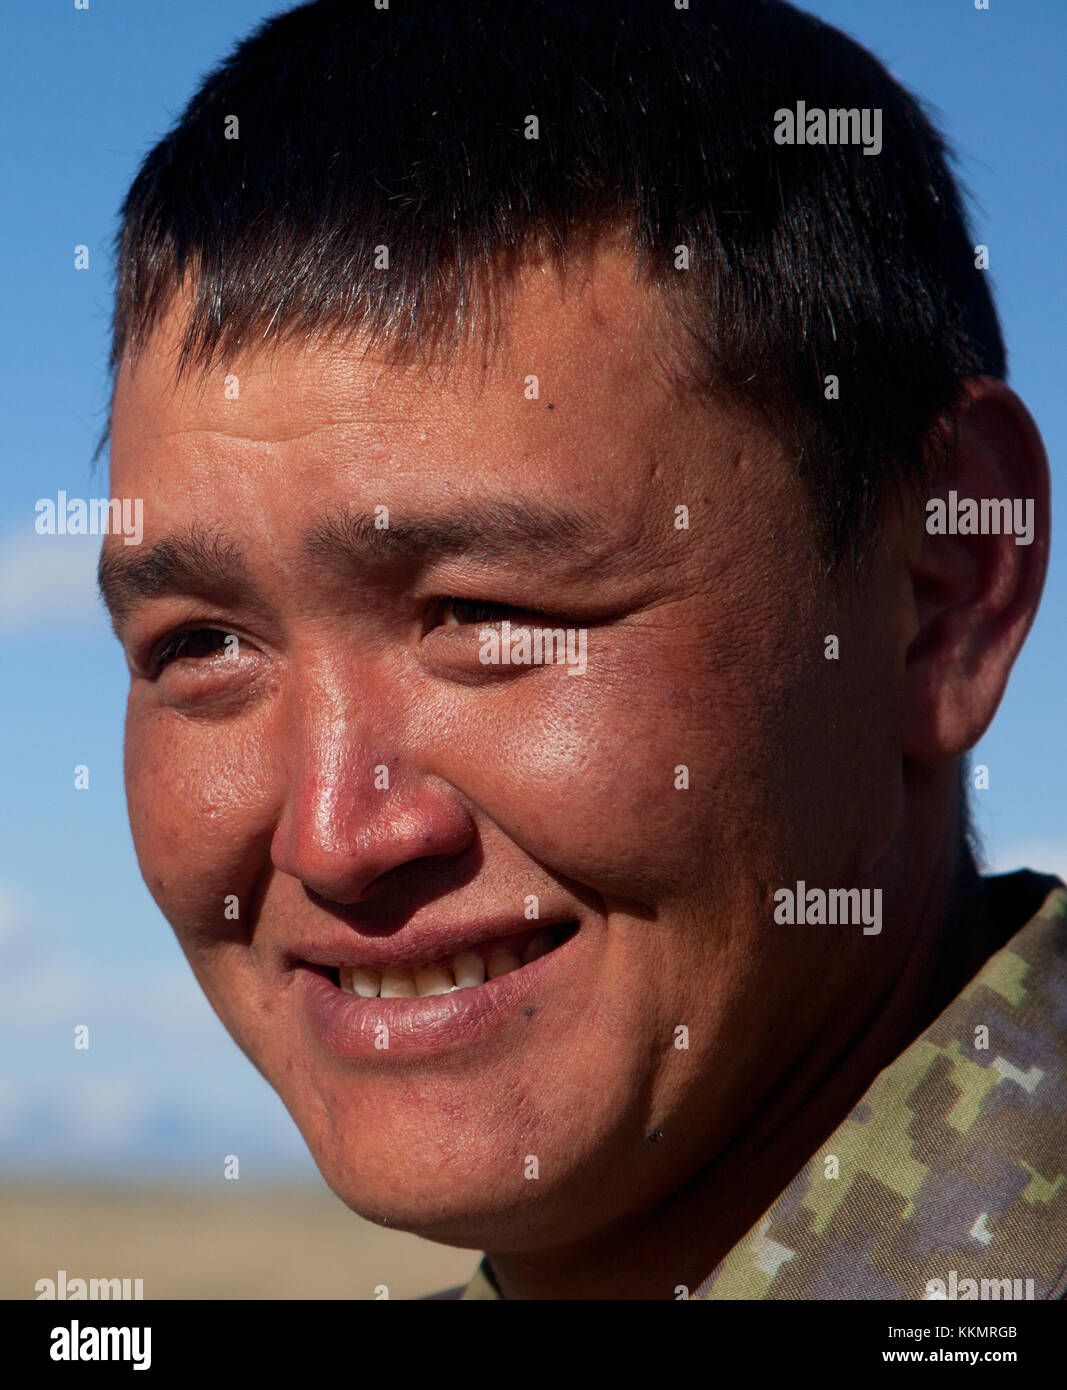 A young man of Asian appearance outdoors Stock Photo